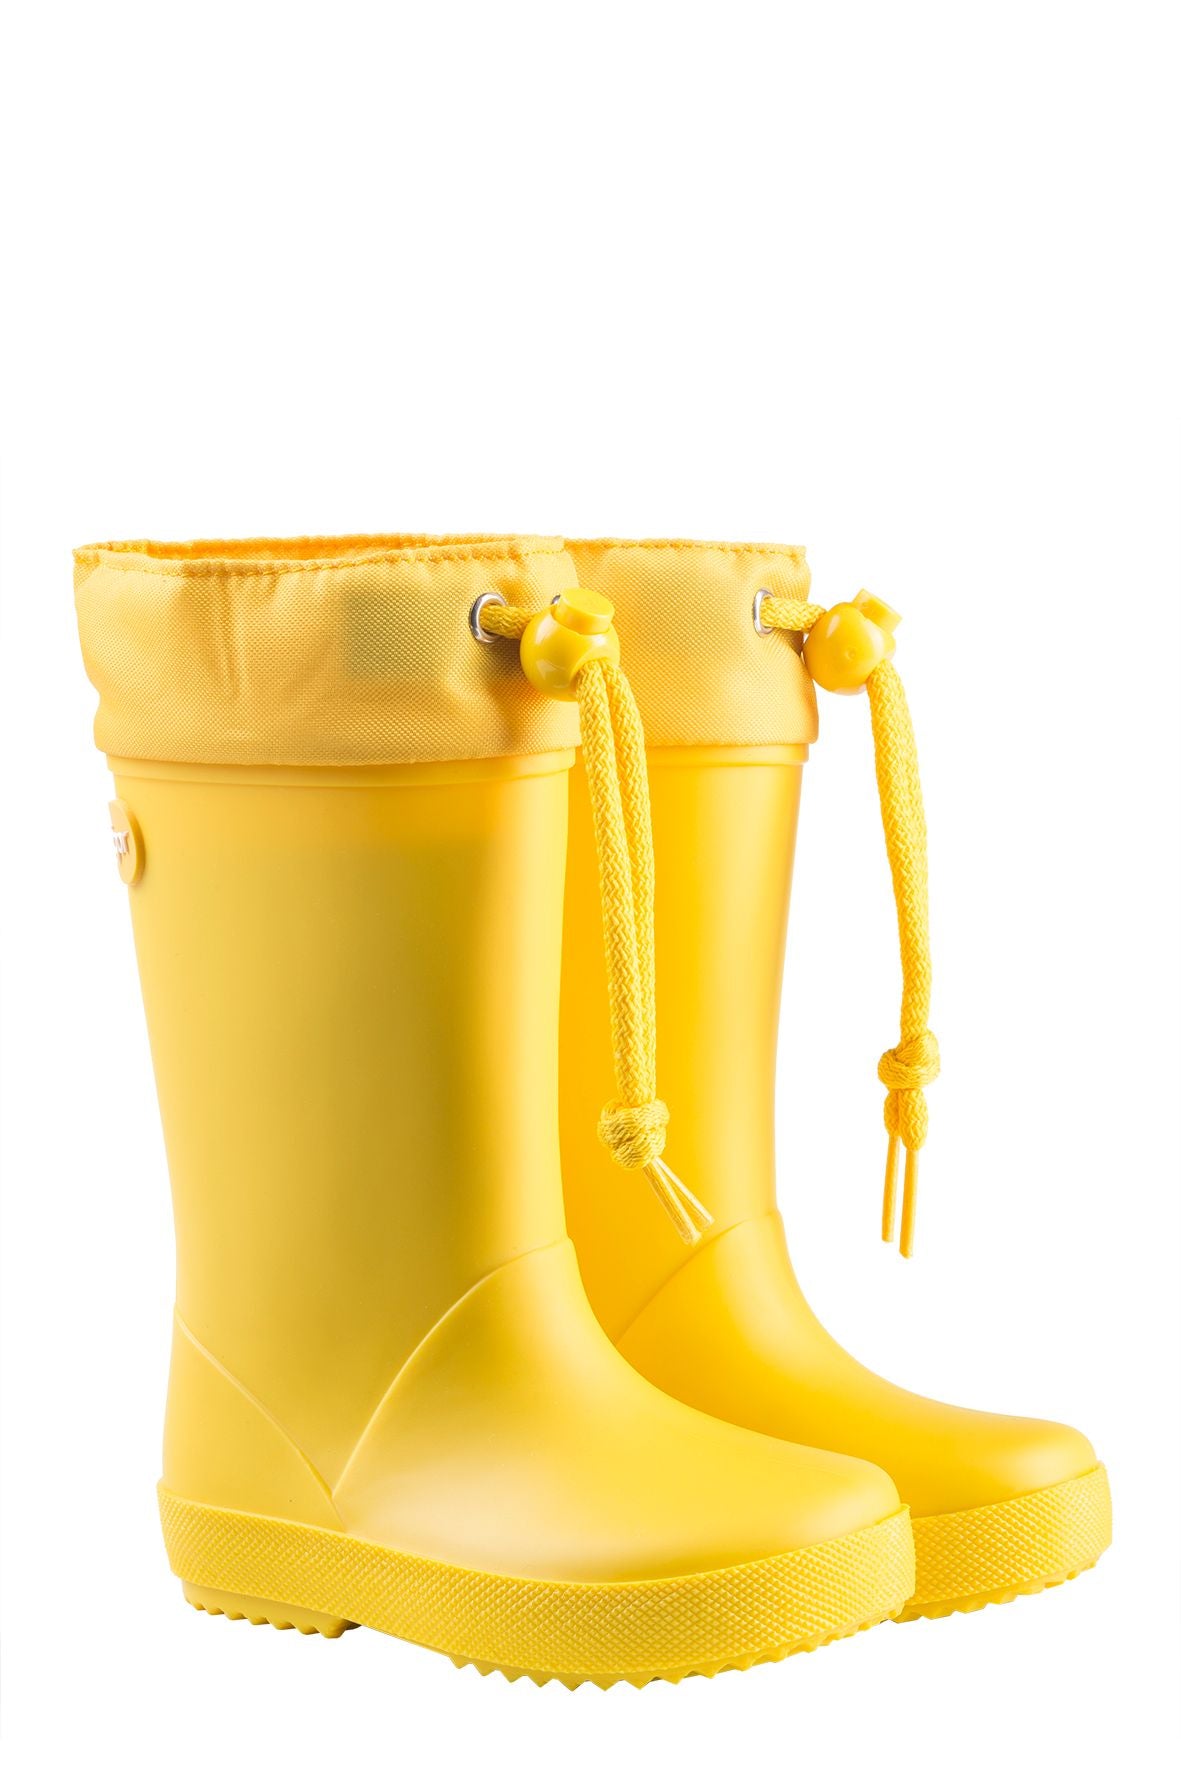 A pair of unisex wellies by Igor, style Splash Cole, in Yellow with toggle fastening. Angled view.